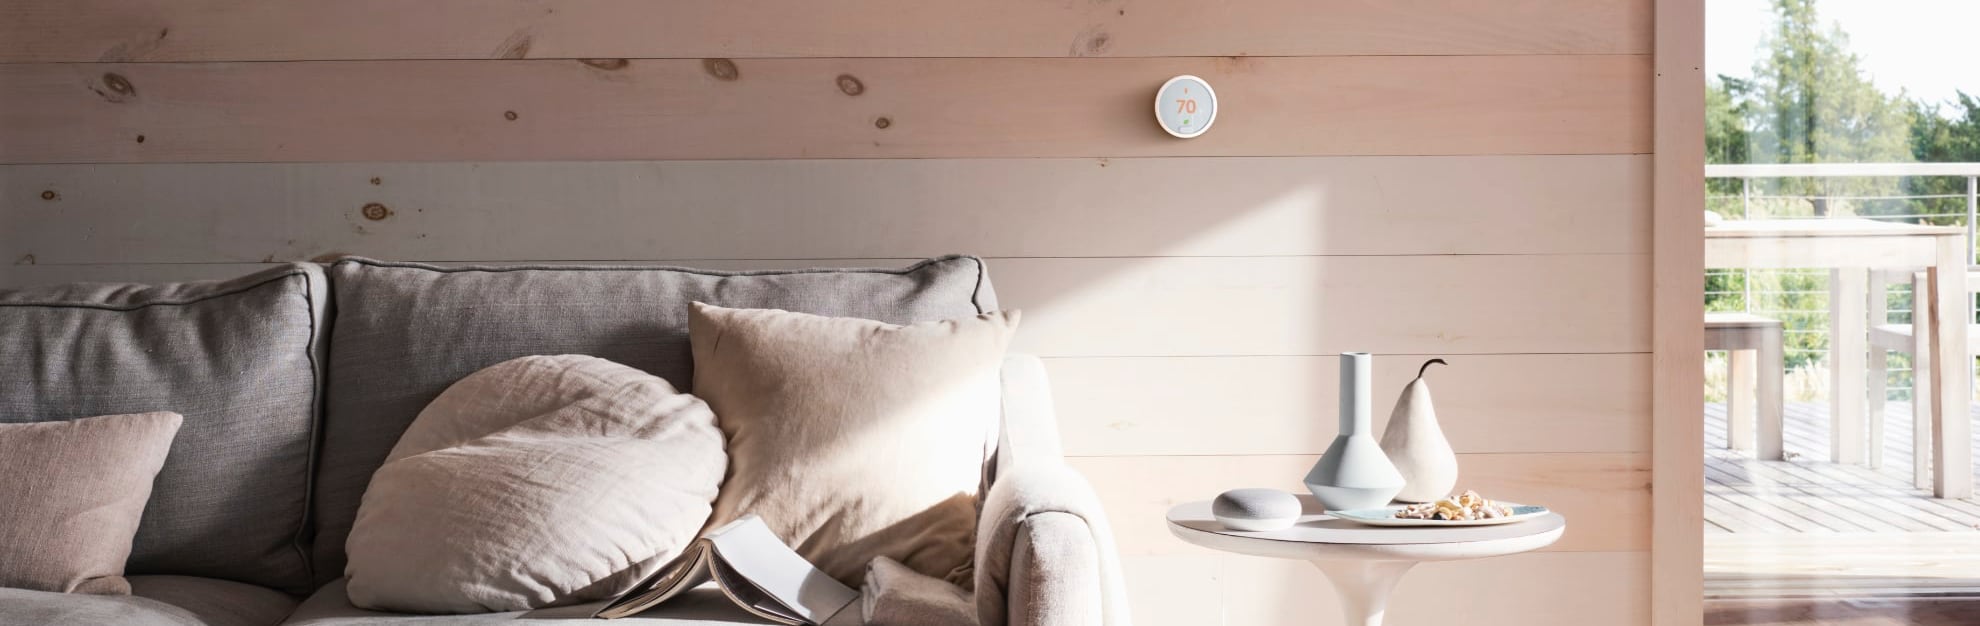 Vivint Home Automation in Saginaw